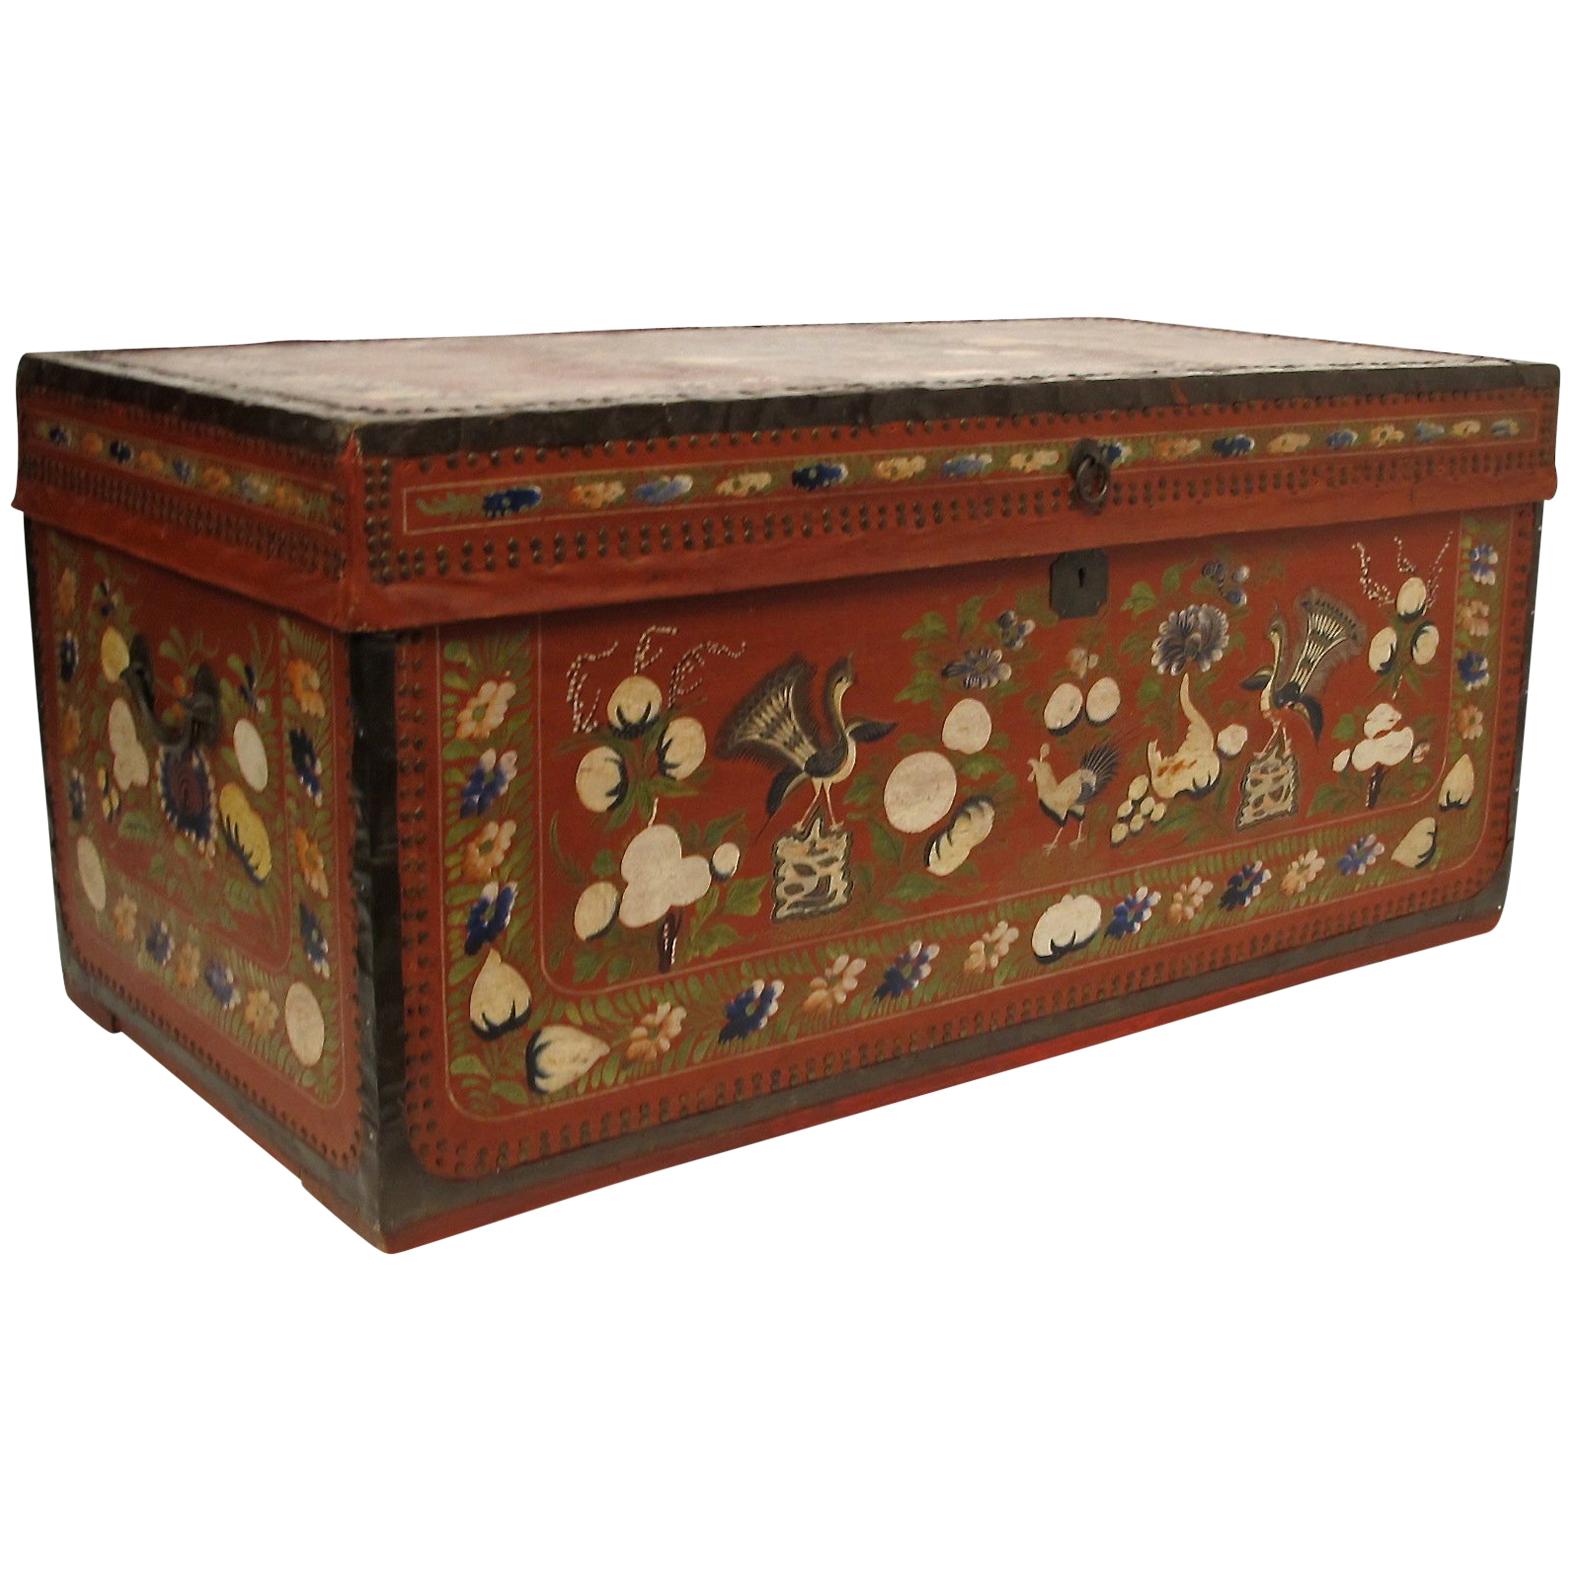 19th Century Chinese Export Hand-Painted Red Leather Trunk